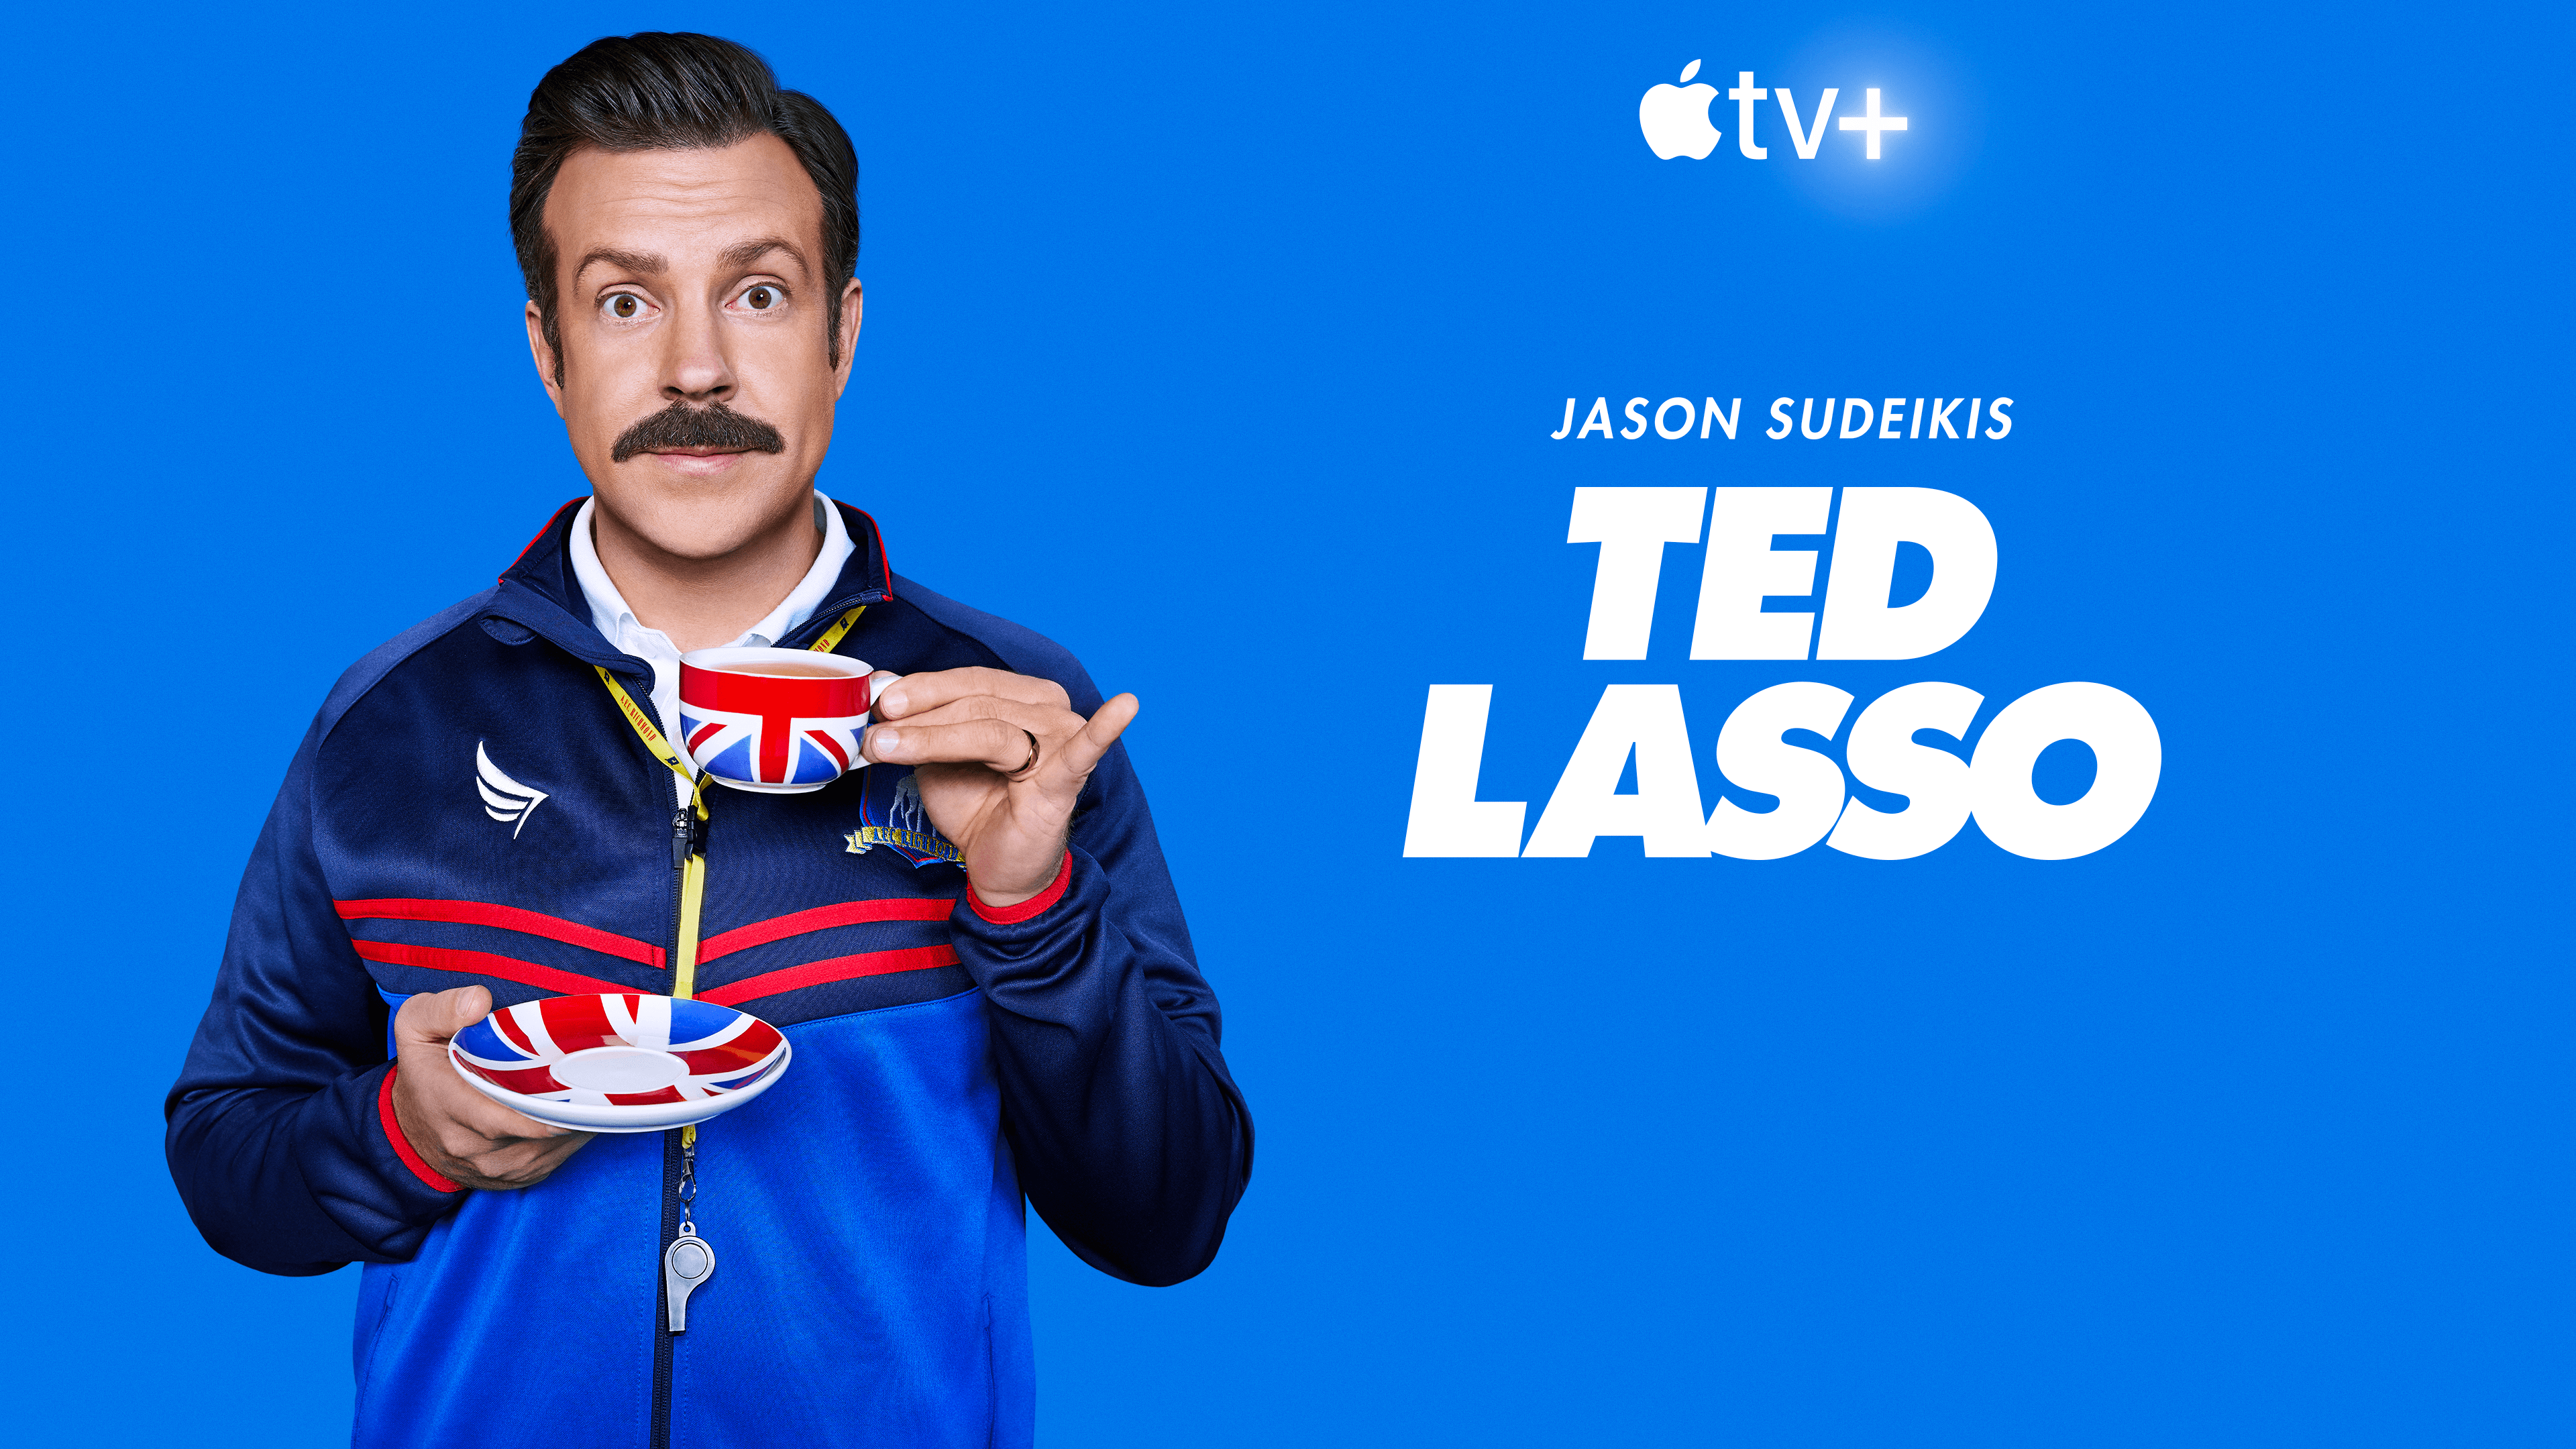 A press image for Ted Lasso on Apple TV+